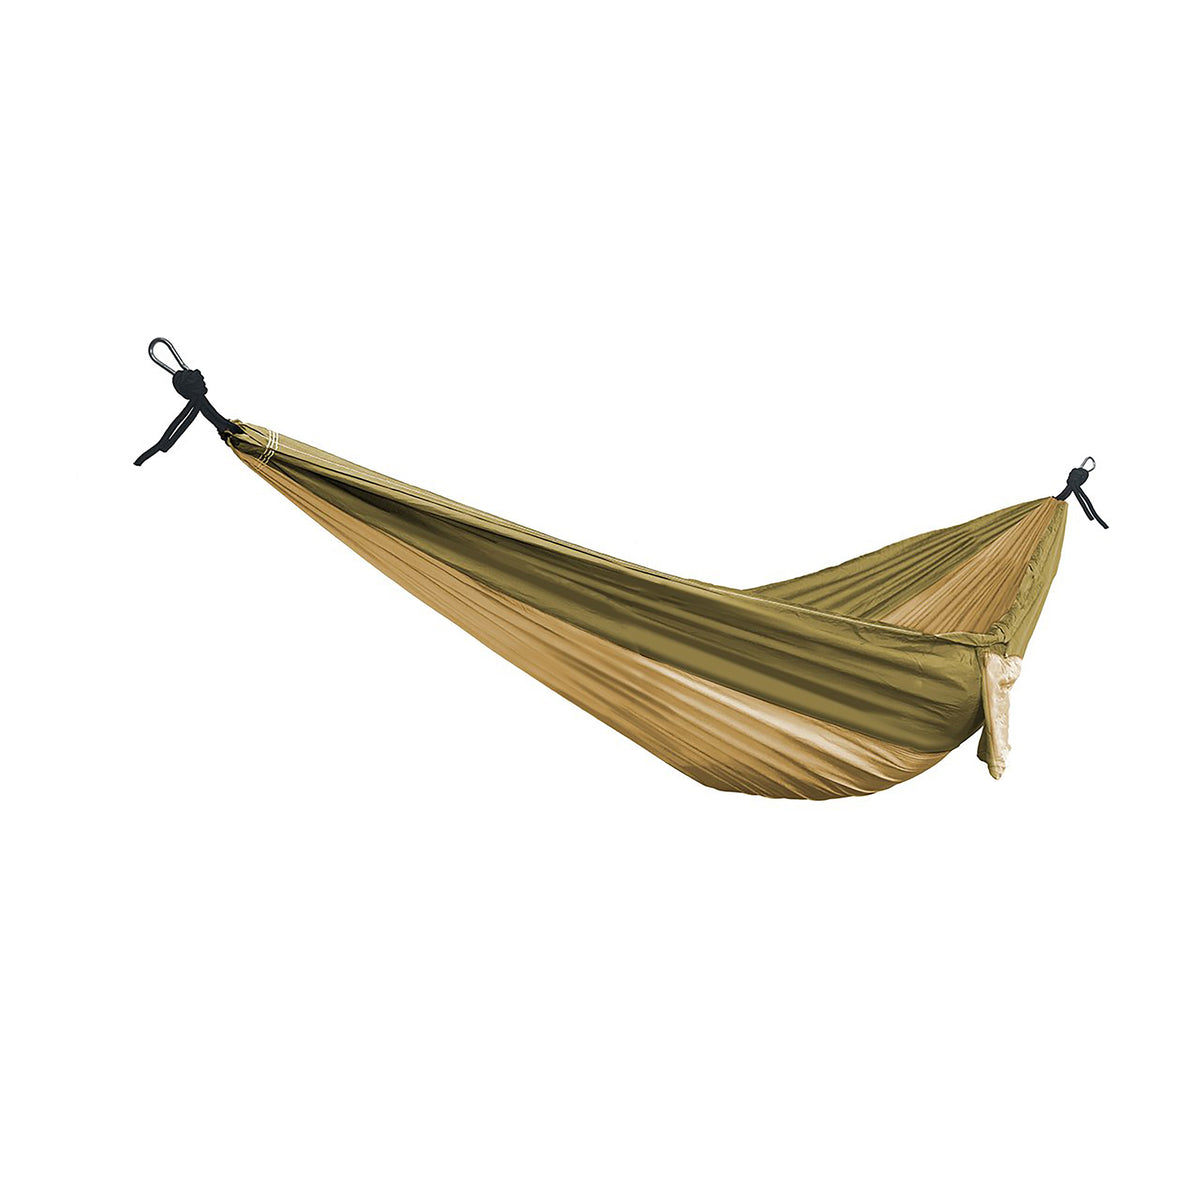 Bliss Hammocks 52-inch Wide Hammock in a Bag with Carabiners and Tree Straps in the desert variation: army green on the top half and a sandy color on the bottom.